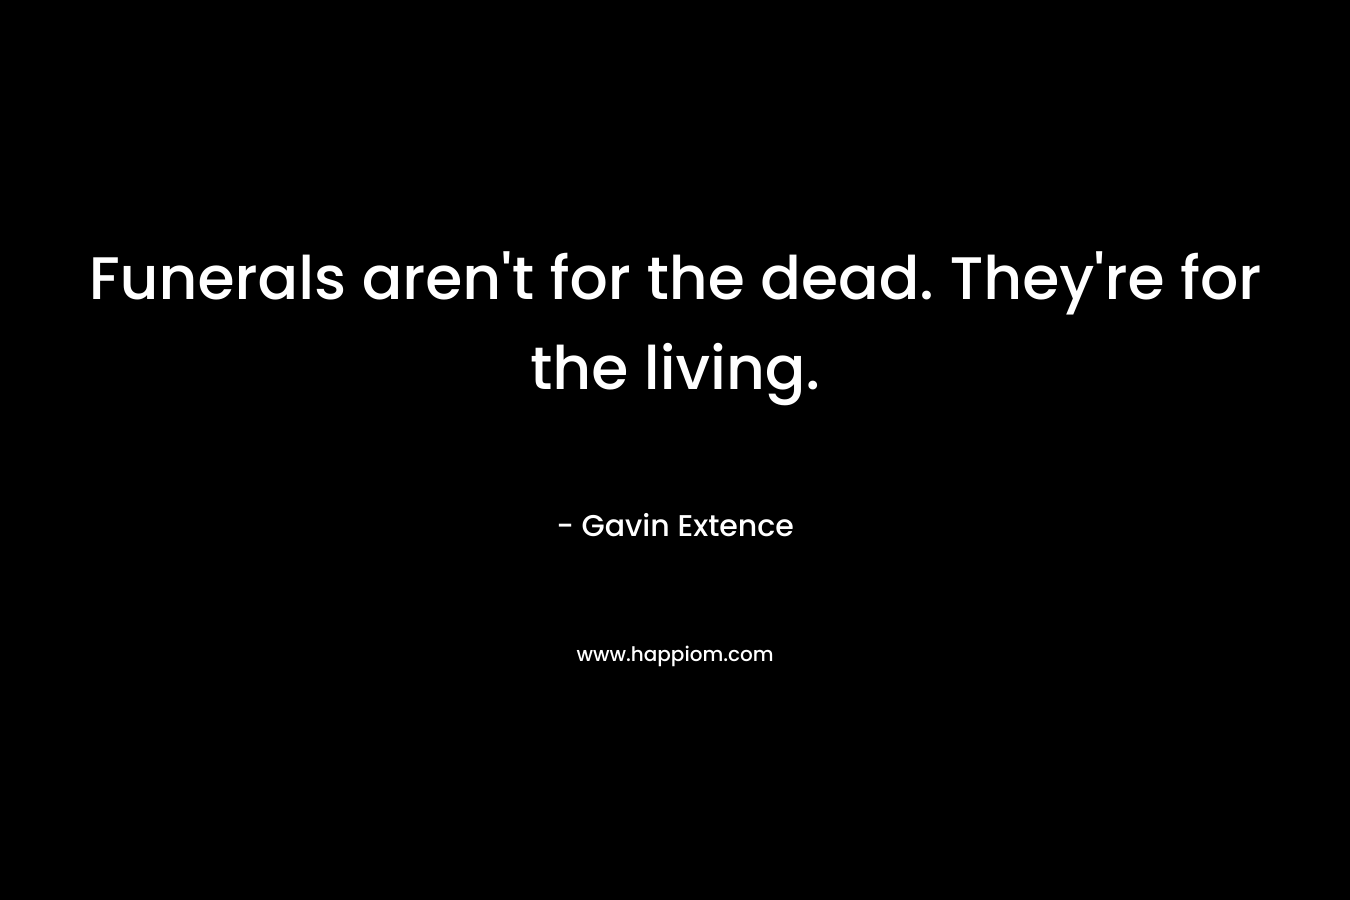 Funerals aren't for the dead. They're for the living.